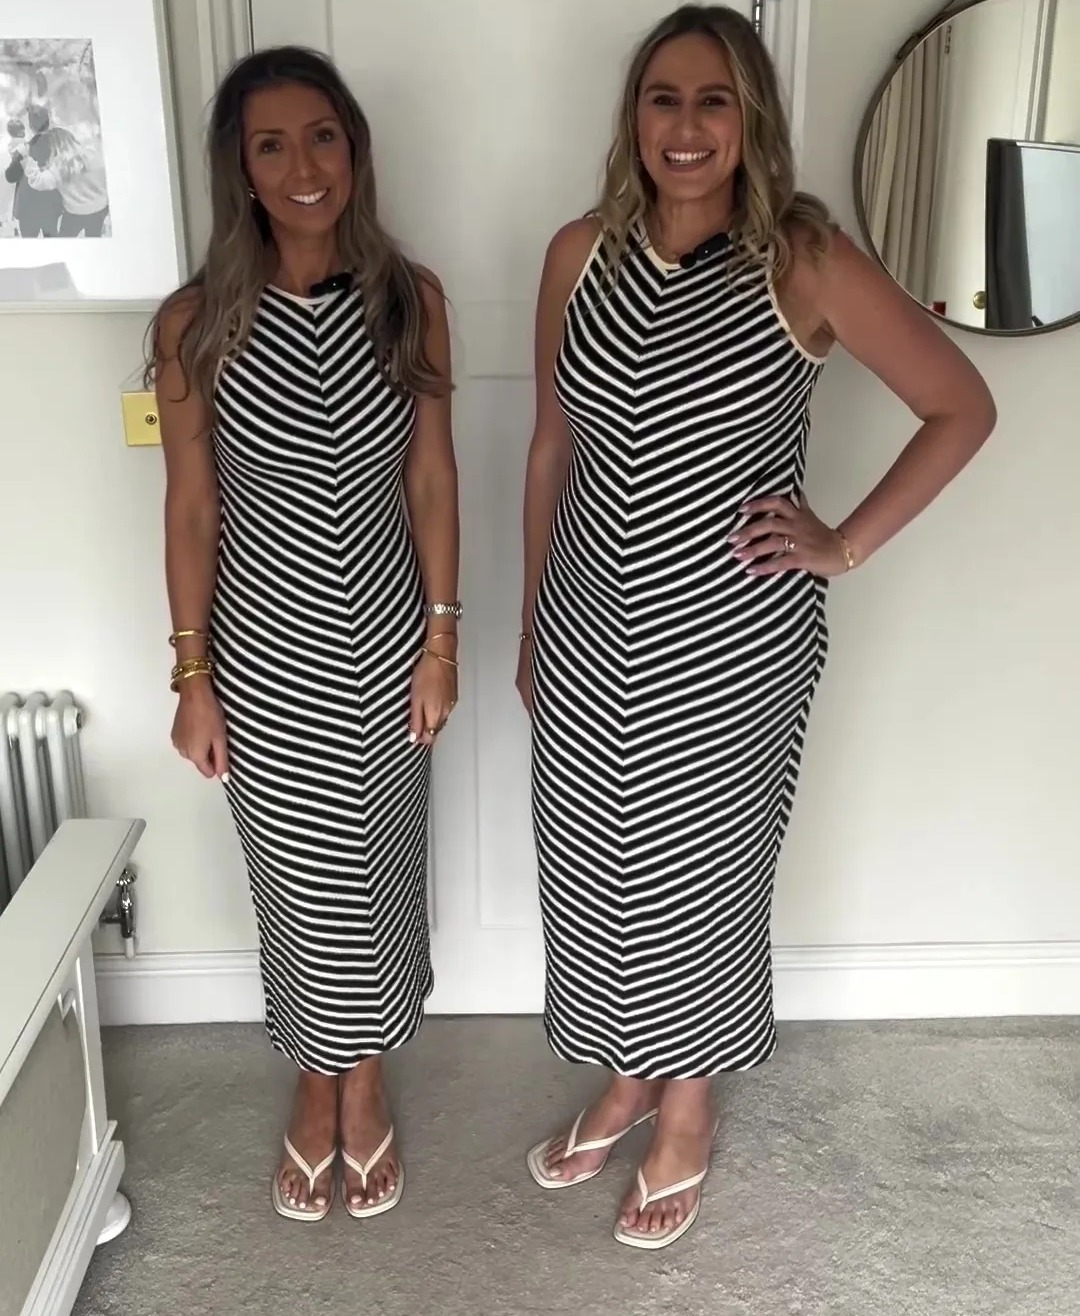 Not only did Rebecca Sudwarts and Kate Seddon find a frock that's perfect for a wedding, but they also got their hands on a striped dress that's super flattering